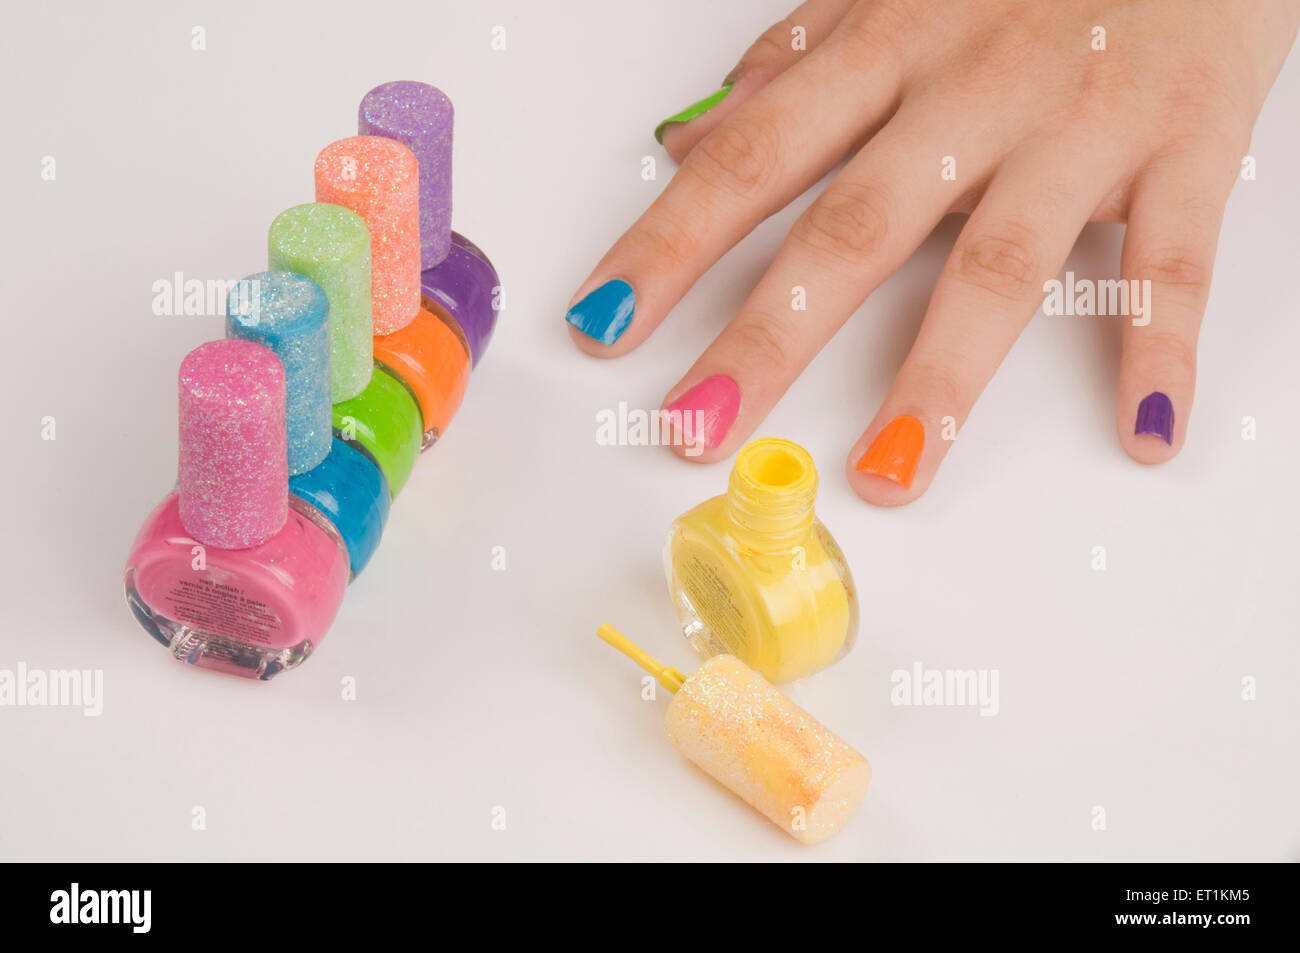 fingers with different colors nail polish bottles Stock Photo